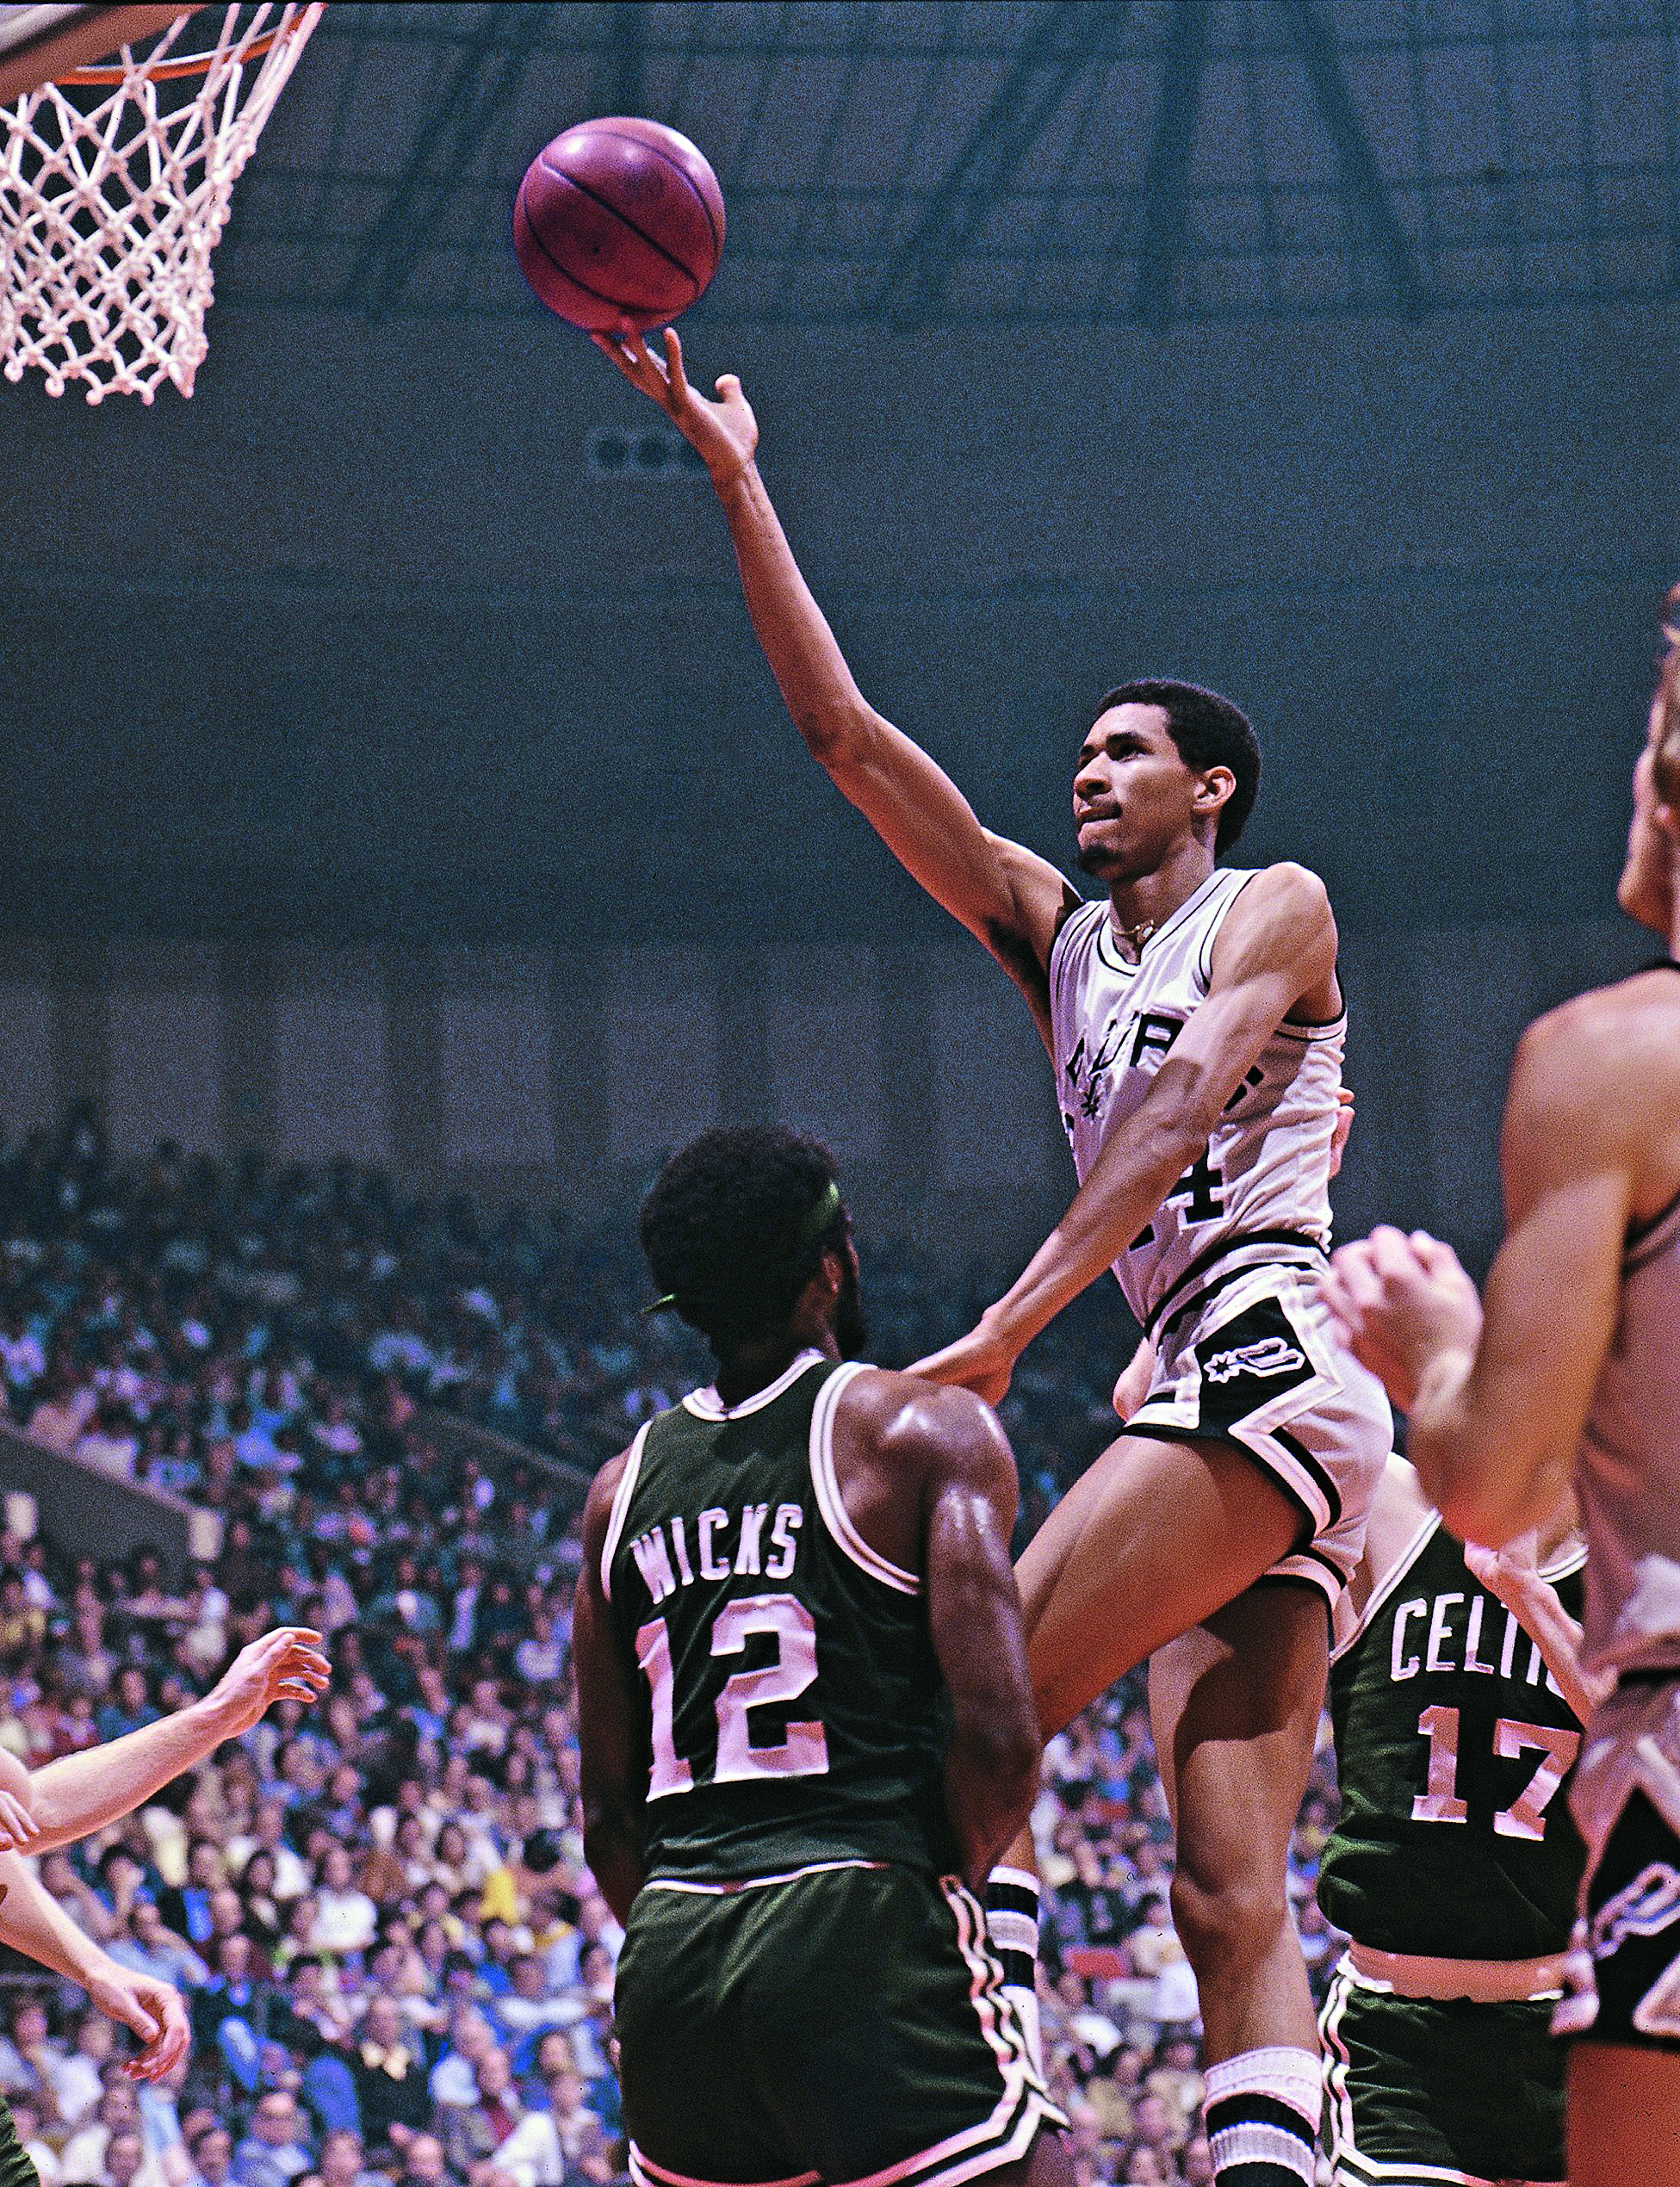 Hall of Famer George Gervin Opens Up About His Career, the Spurs and Life after Basketball in ‘Ice: Ice: Why I Was Born to Score’